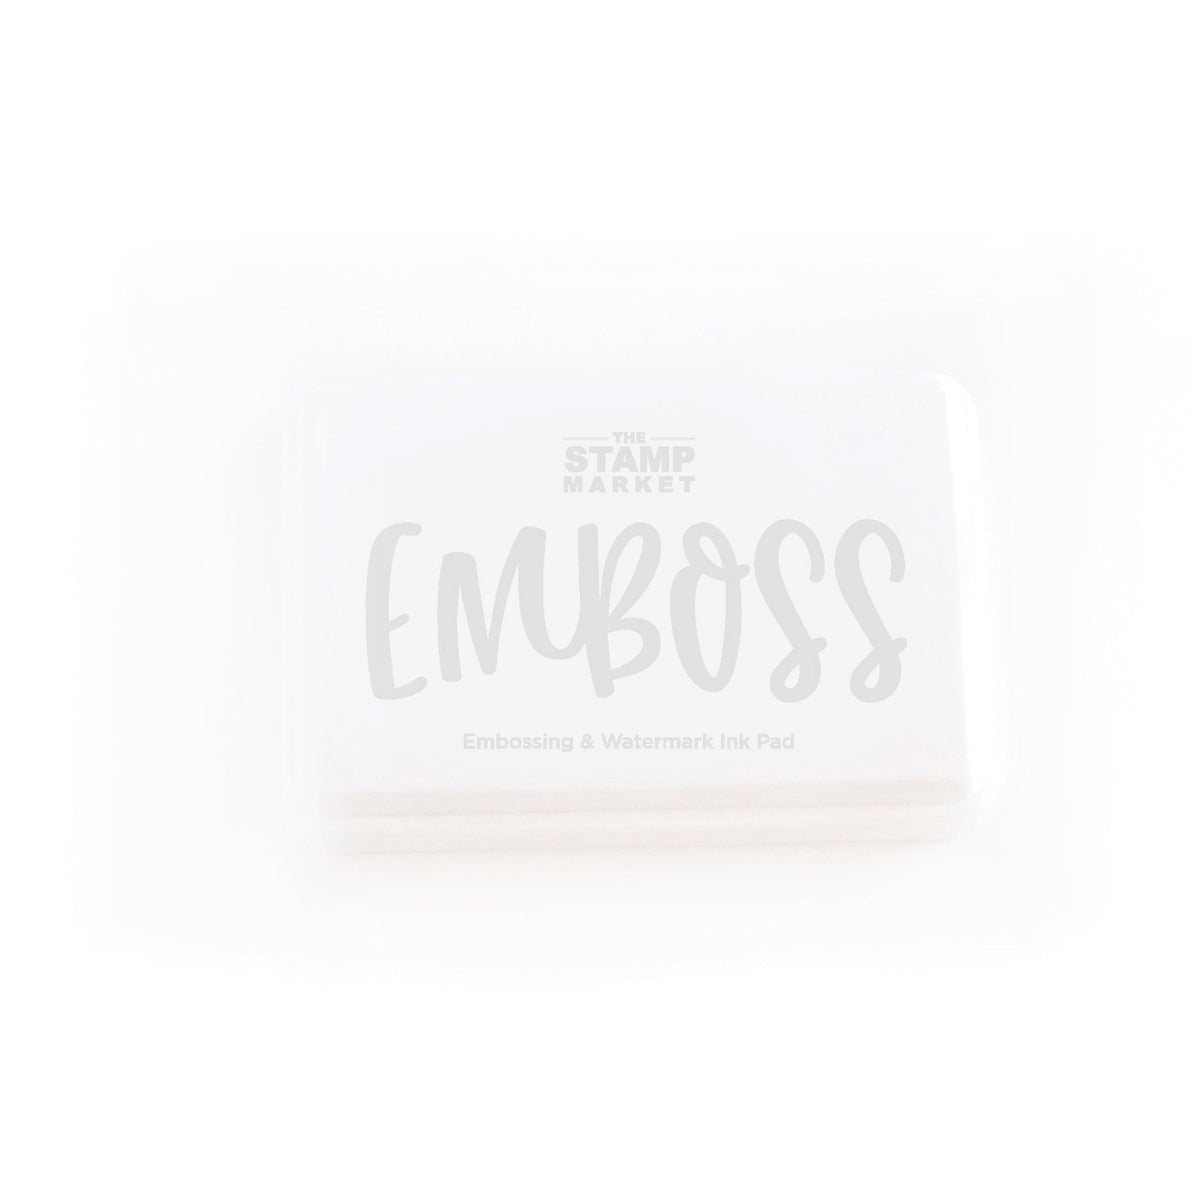 Emboss Ink Pad – The Stamp Market